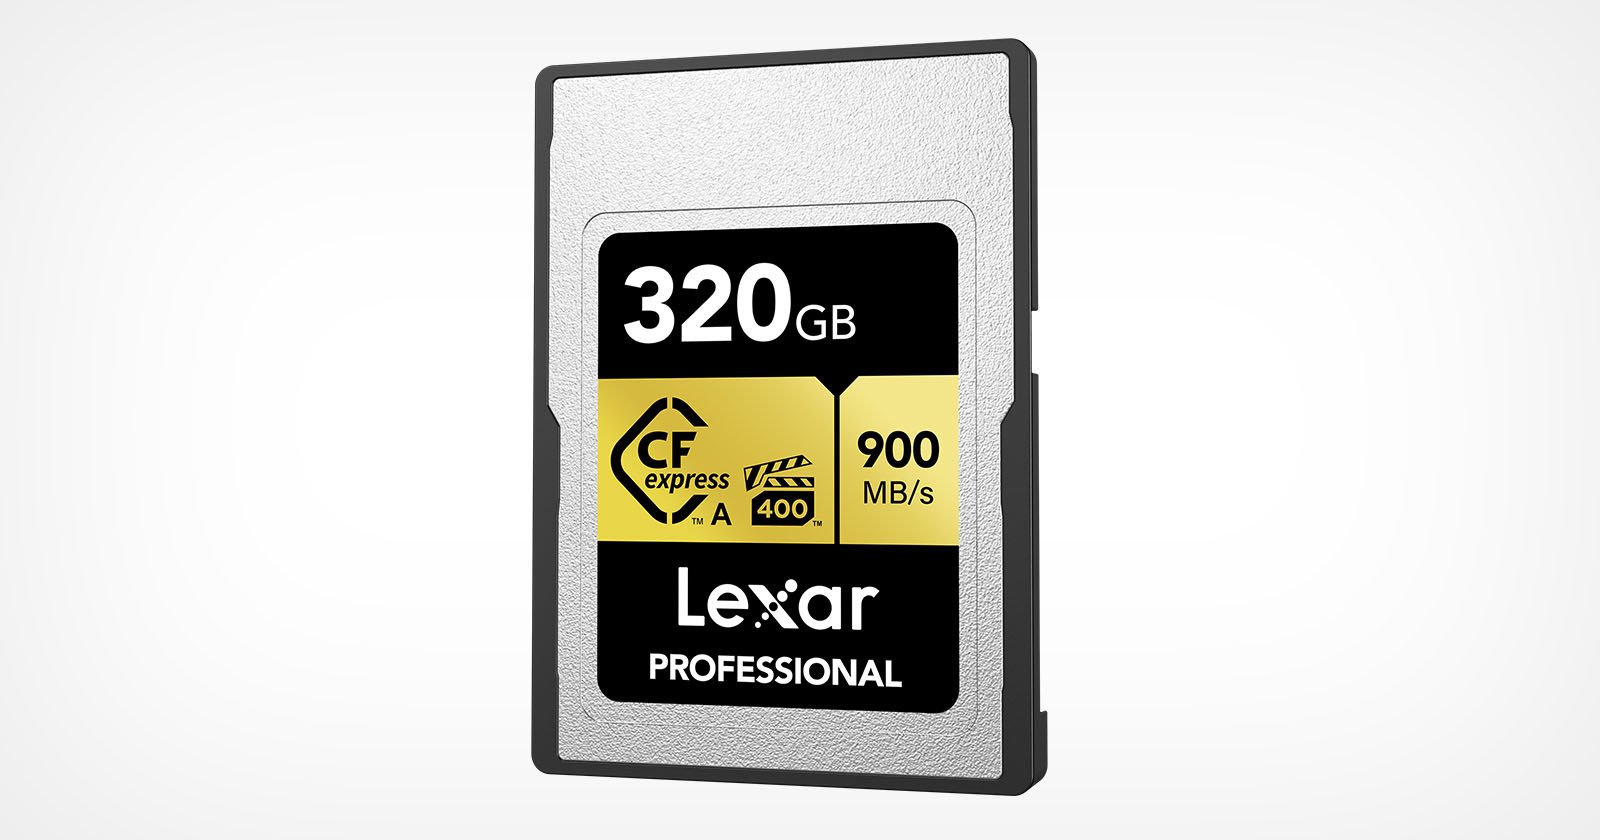  lexar introduces higher capacity 320gb cfexpress type card 